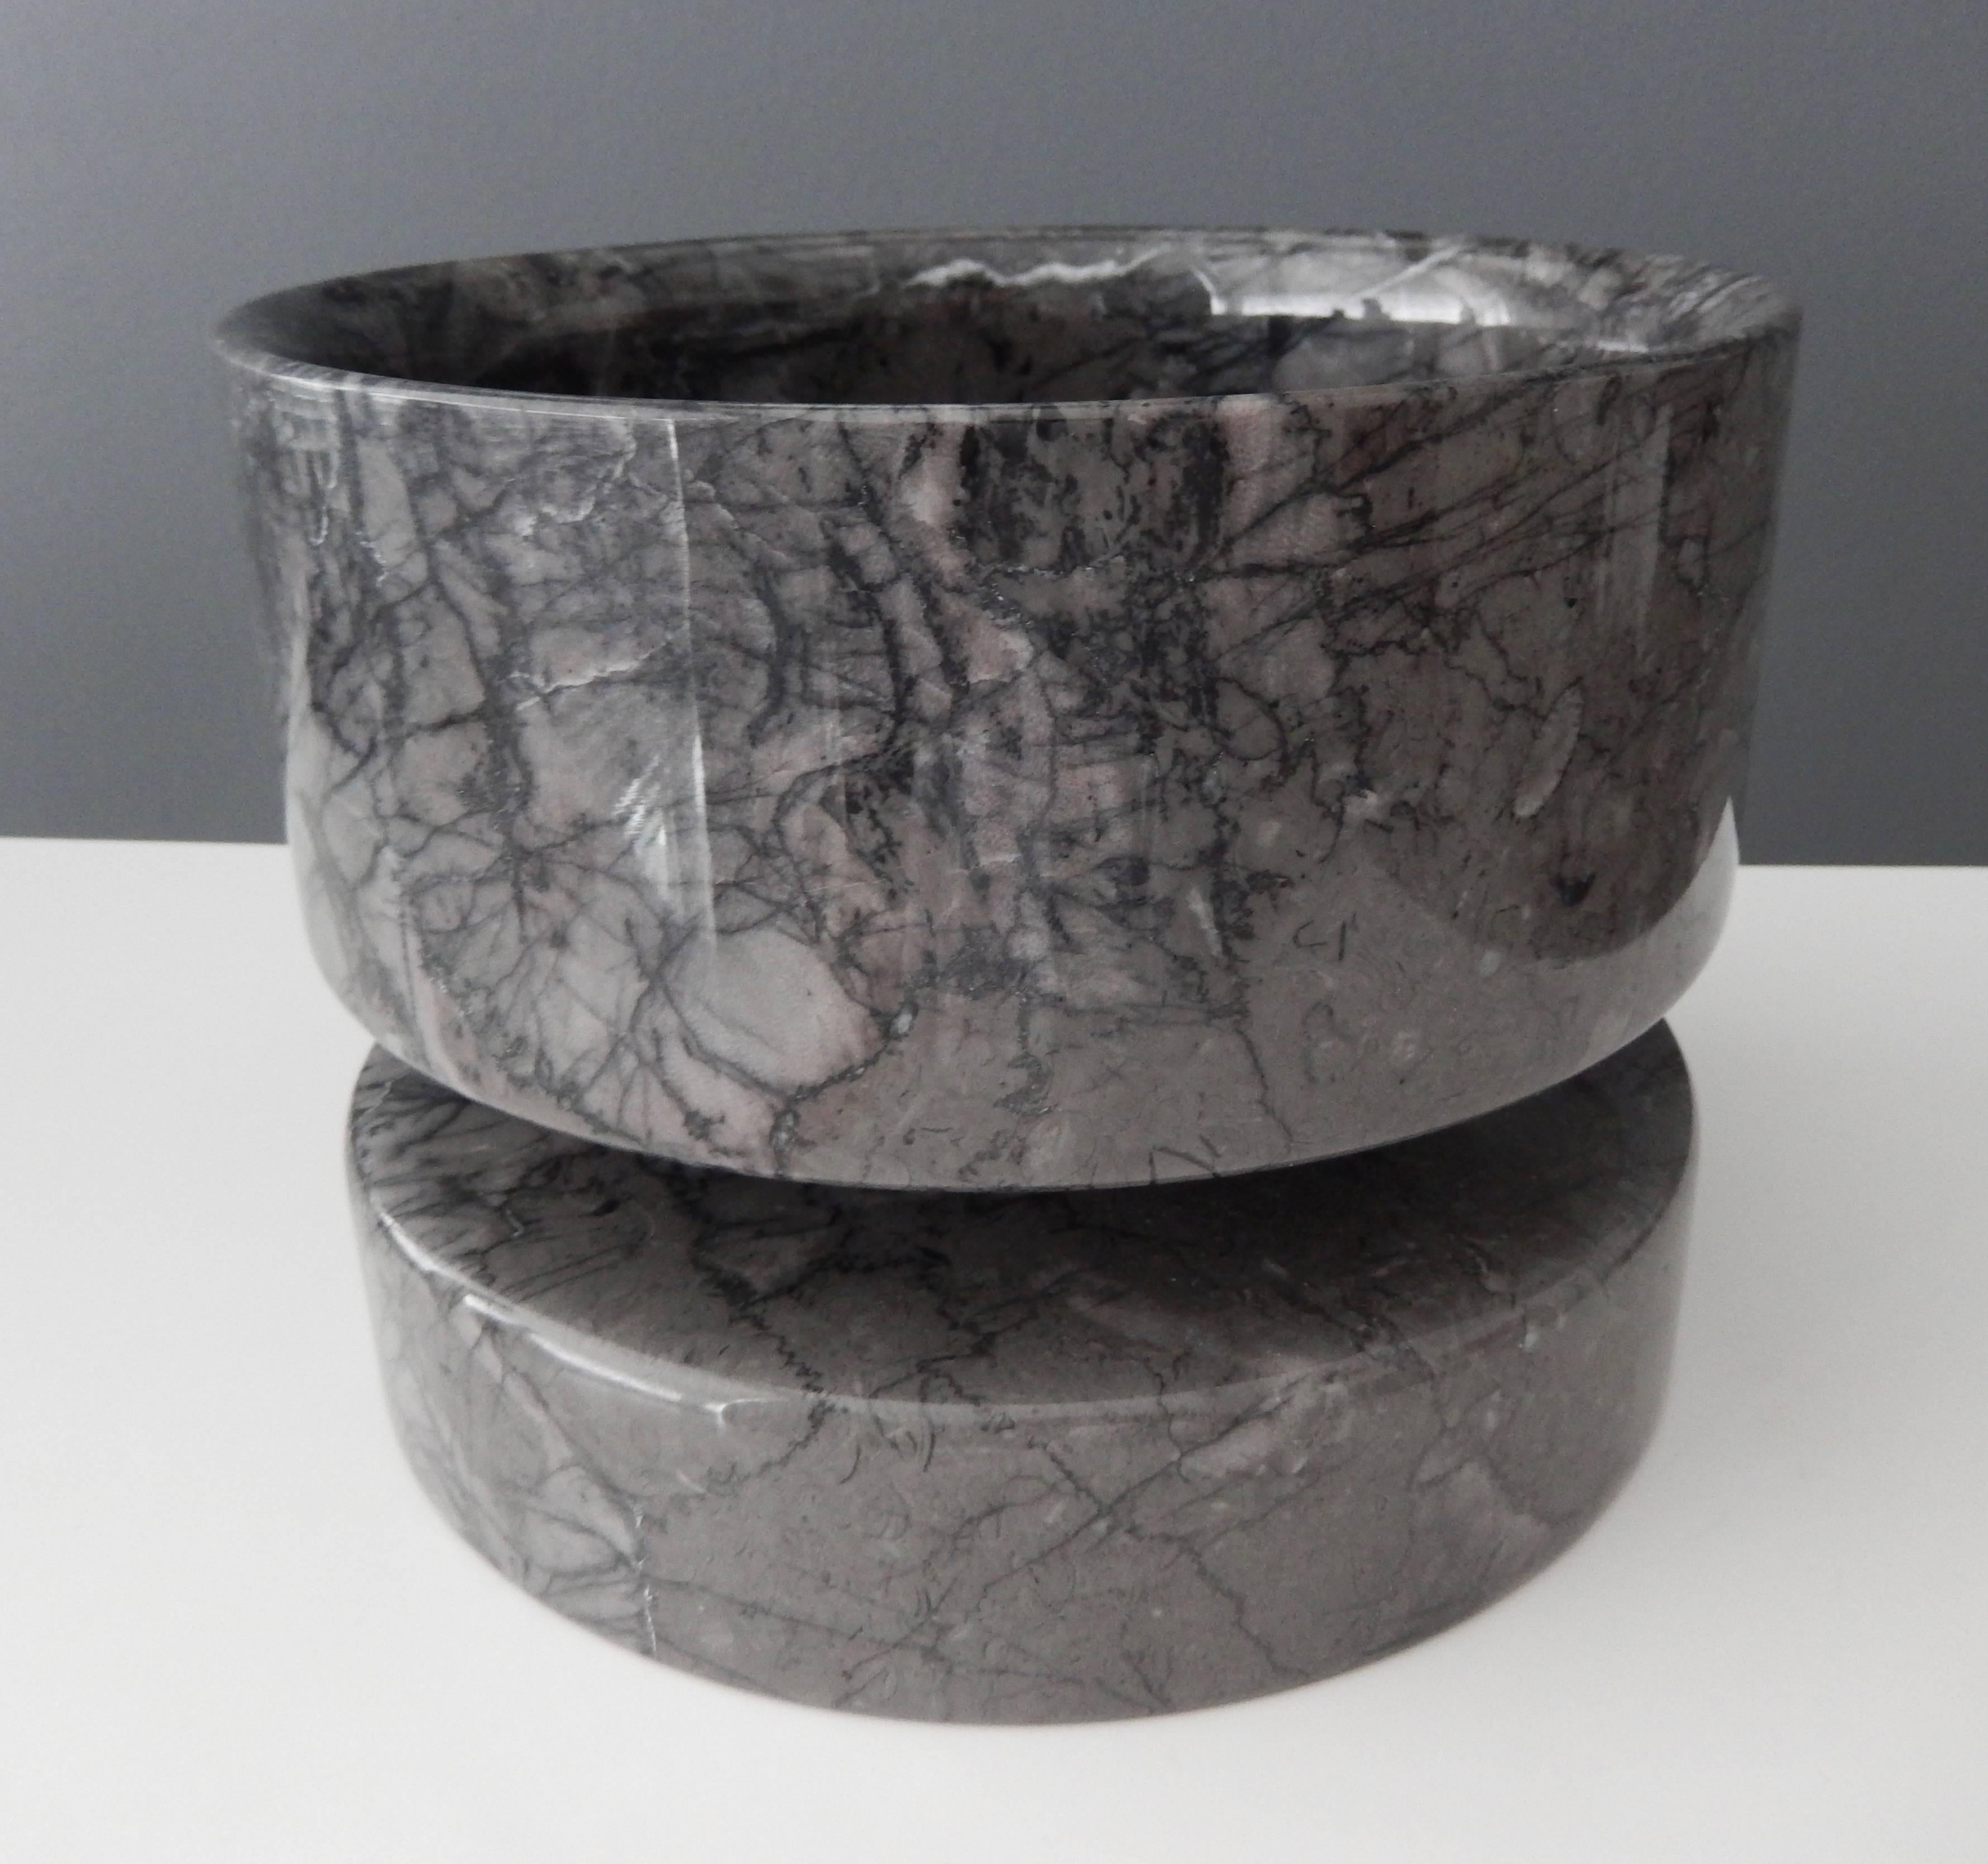 A black Carrara marble bowl for Knoll International by the distinguished Italian architect and designer Angelo Mangiarotti (1921-2012). Retains original Knoll and "Made in Italy" labels.